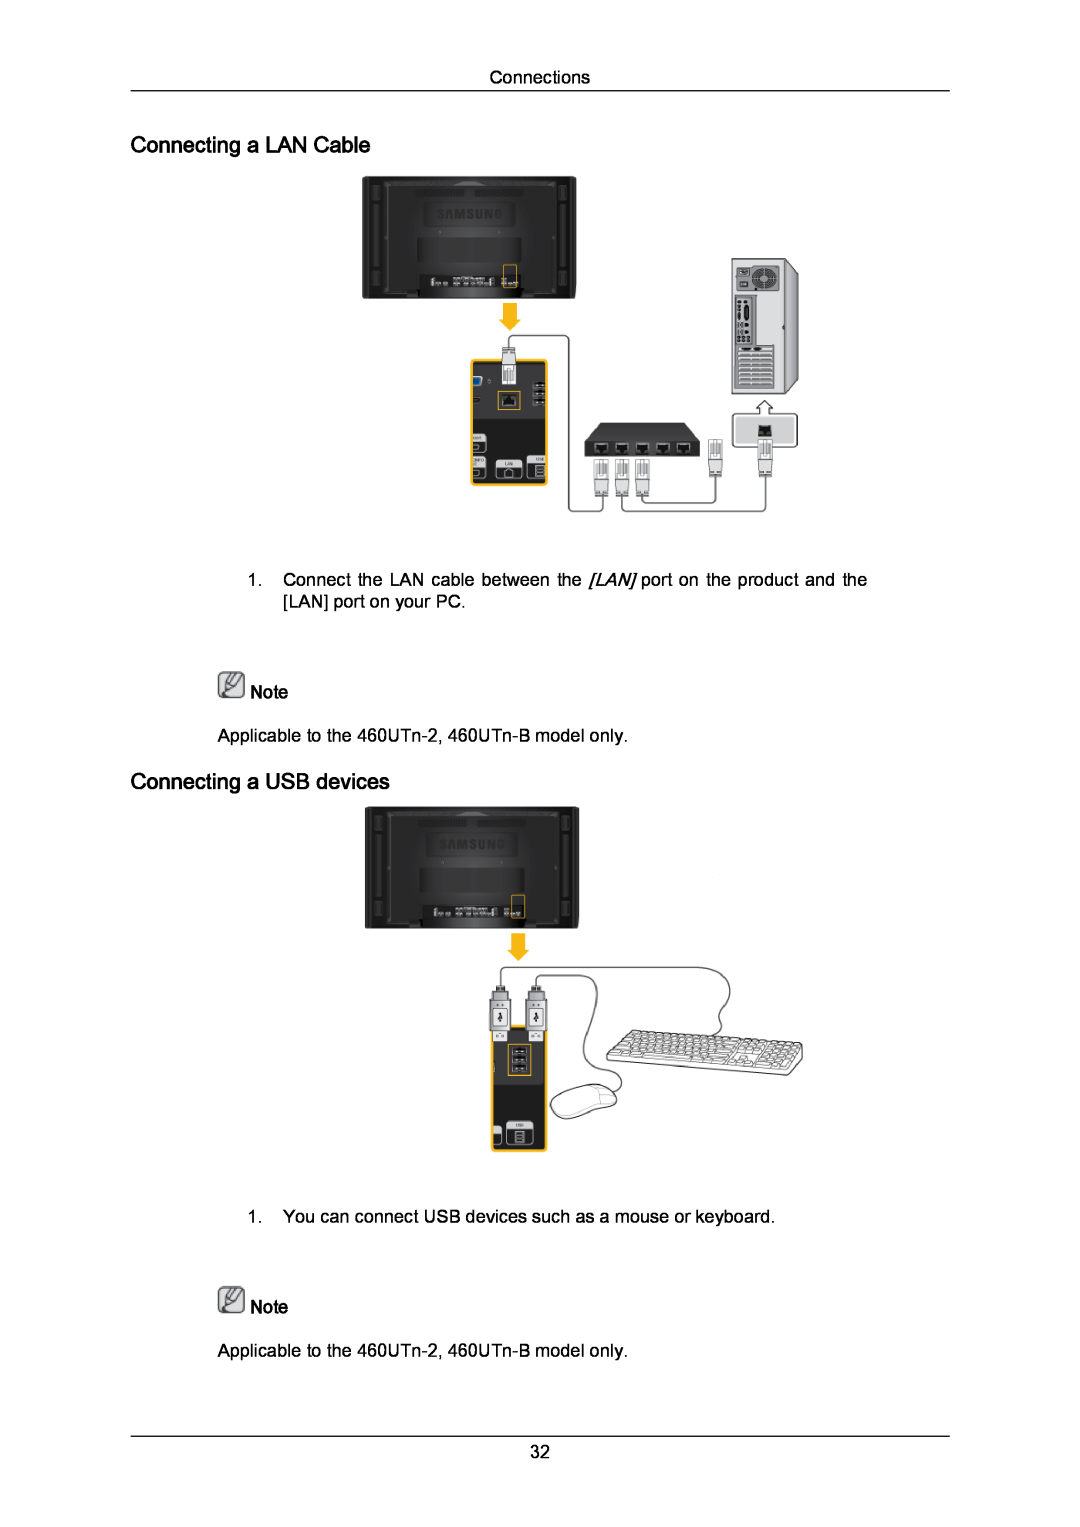 Samsung 460UTN-2, 460UTN-B, 460UT-B, 460UT-2 user manual Connecting a LAN Cable, Connecting a USB devices, Connections 